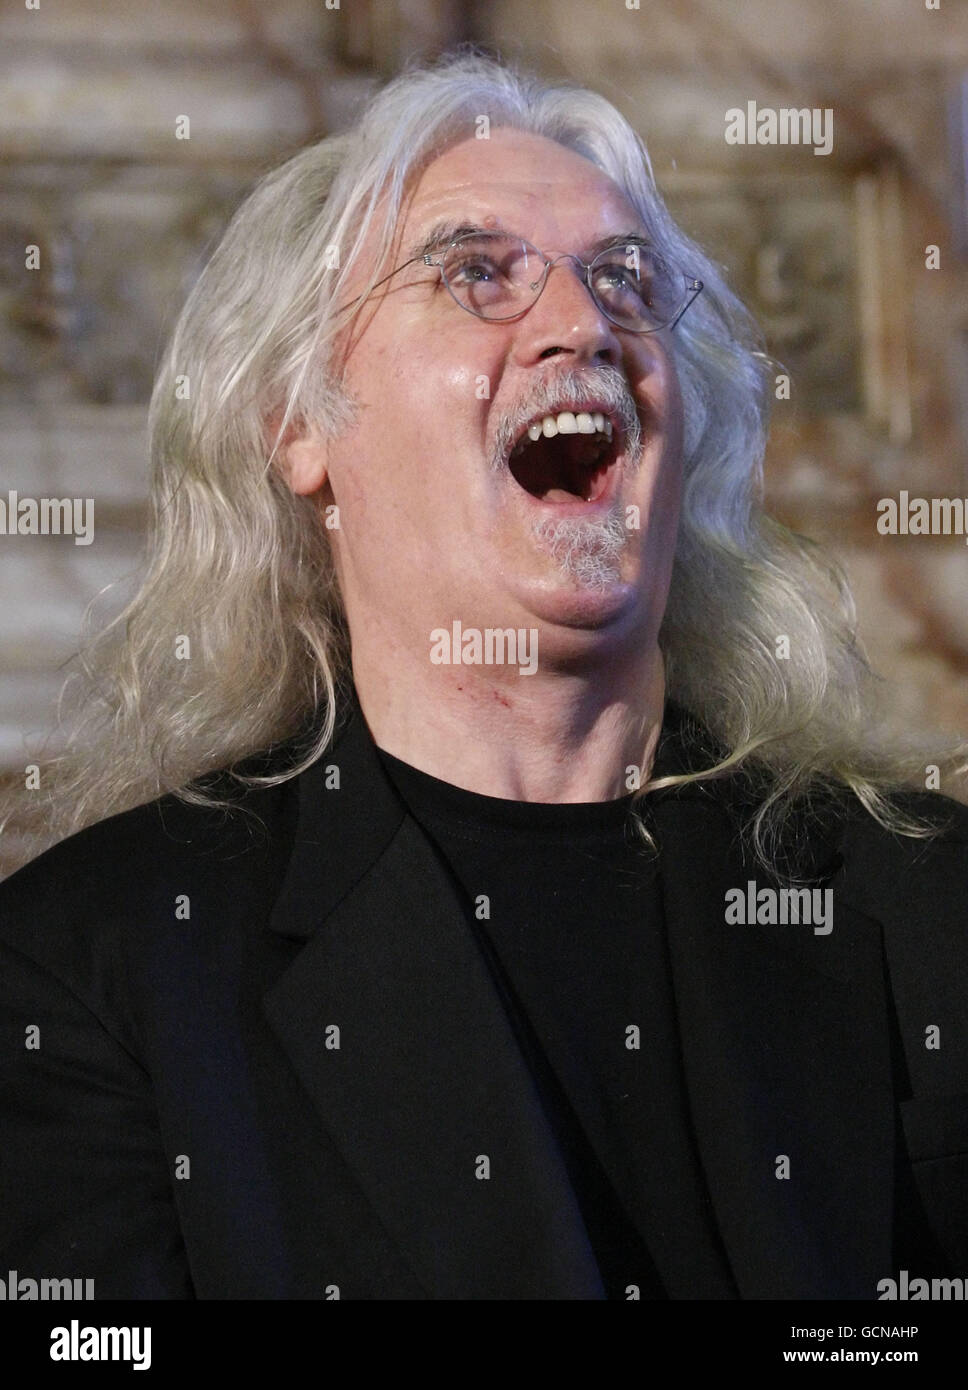 Comedian Billy Connolly during a press conference at the City Chambers, Glasgow, ahead of a ceremony where he will receive the Freedom of the City. PRESS ASSOCIATION Photo. Picture date: Friday August 20, 2010. Born and raised in Glasgow, Connolly began his working life in the Clyde shipyards but soon moved into entertainment with his folk singing and comedy performances. Lord Provost Bob Winter led calls for the city to recognise the performer for his contribution to comedy, film, music and his charity work. See PA story SHOWBIZ Connolly. Photo credit should read: Danny Lawson/PA Wire Stock Photo